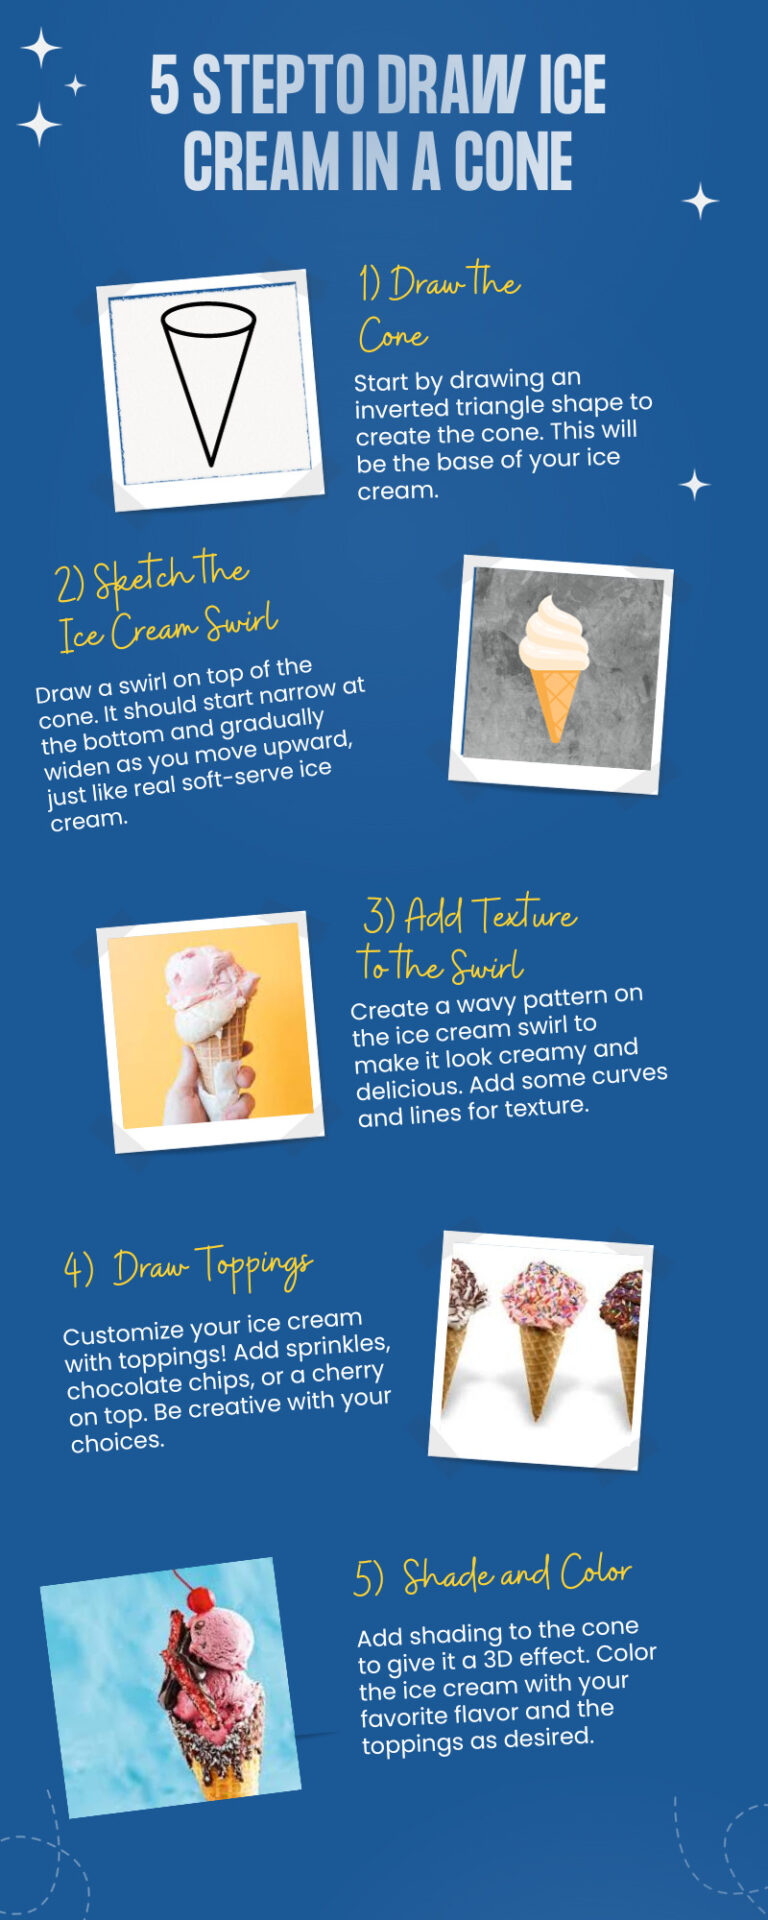 Steps to Draw Ice Cream Cone